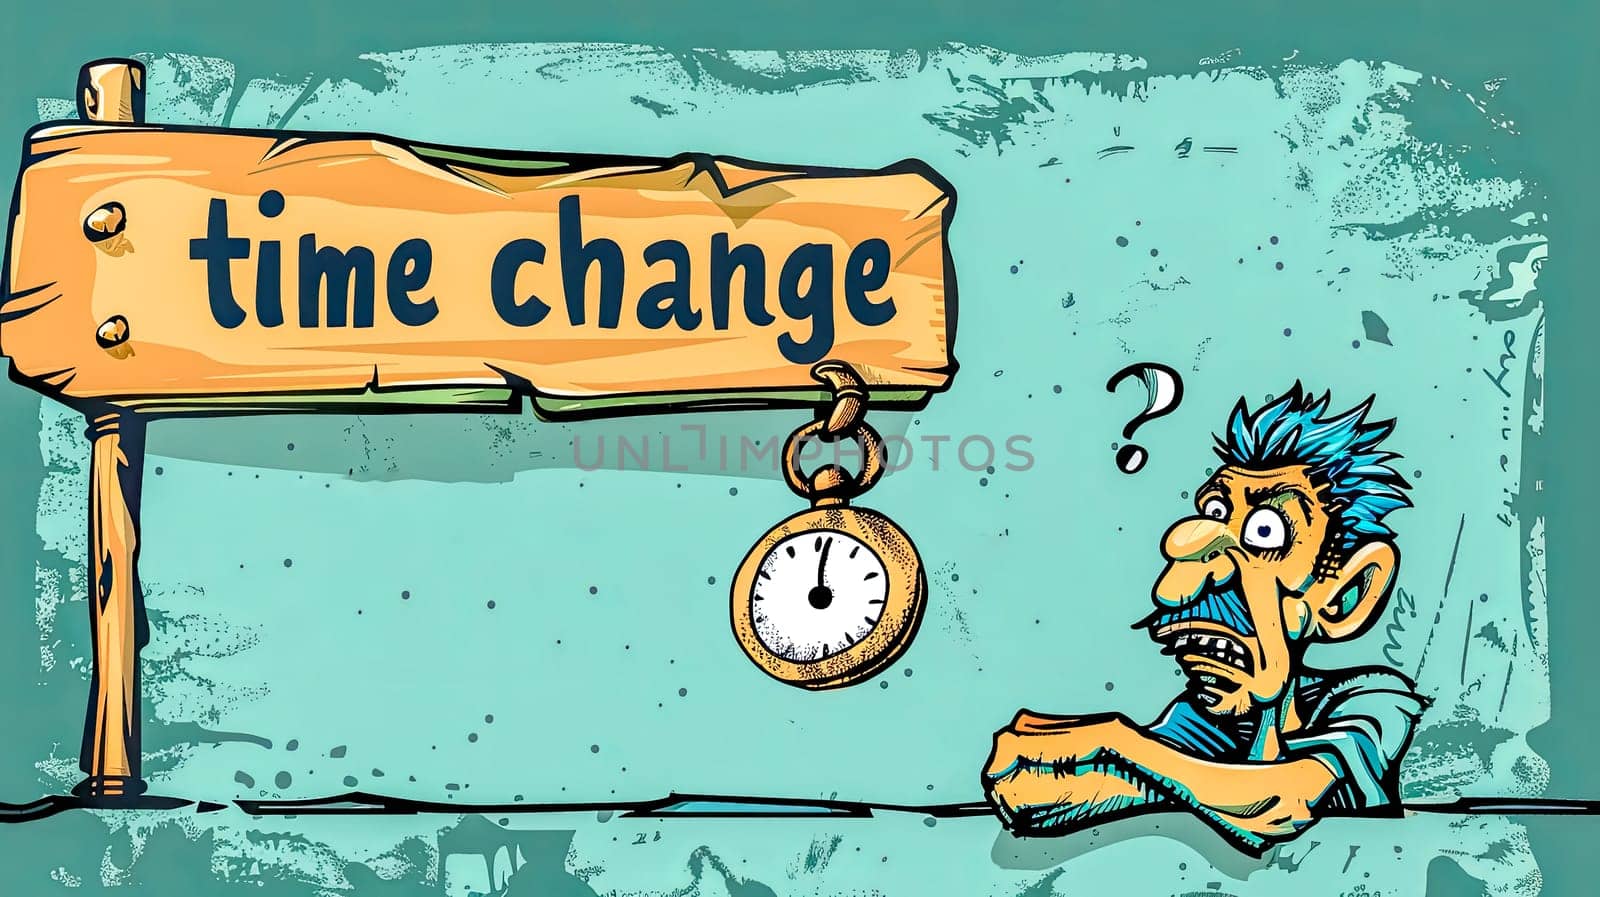 Confused man and time change sign illustration by Edophoto